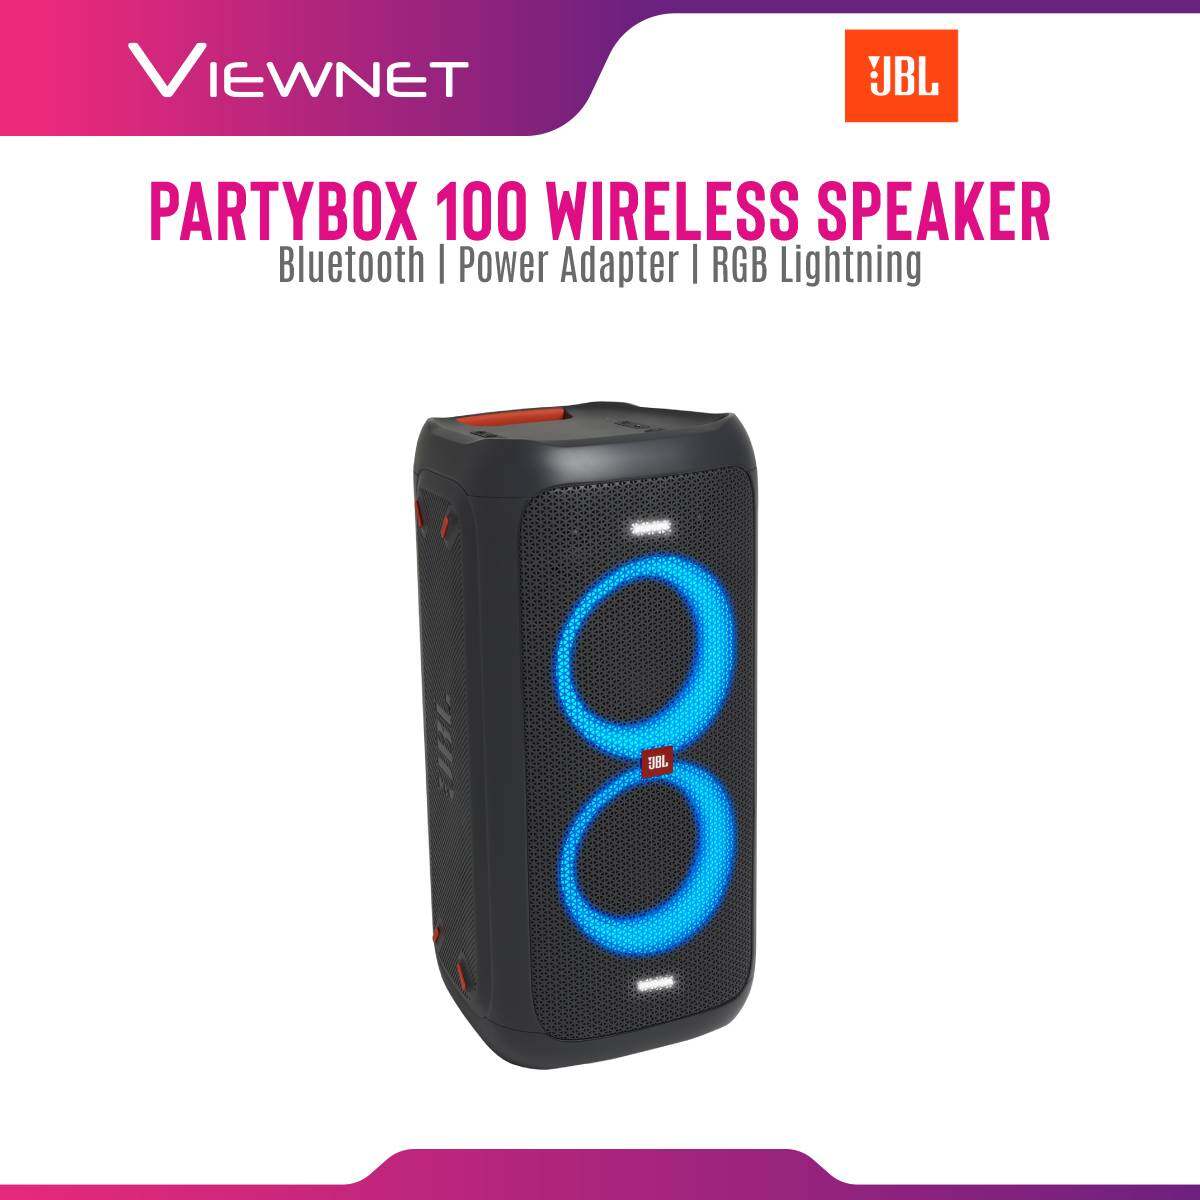 JBL Partybox 100 High Power Portable Wireless Bluetooth Audio System with RGB LED light, massive battery, JBL signature sound